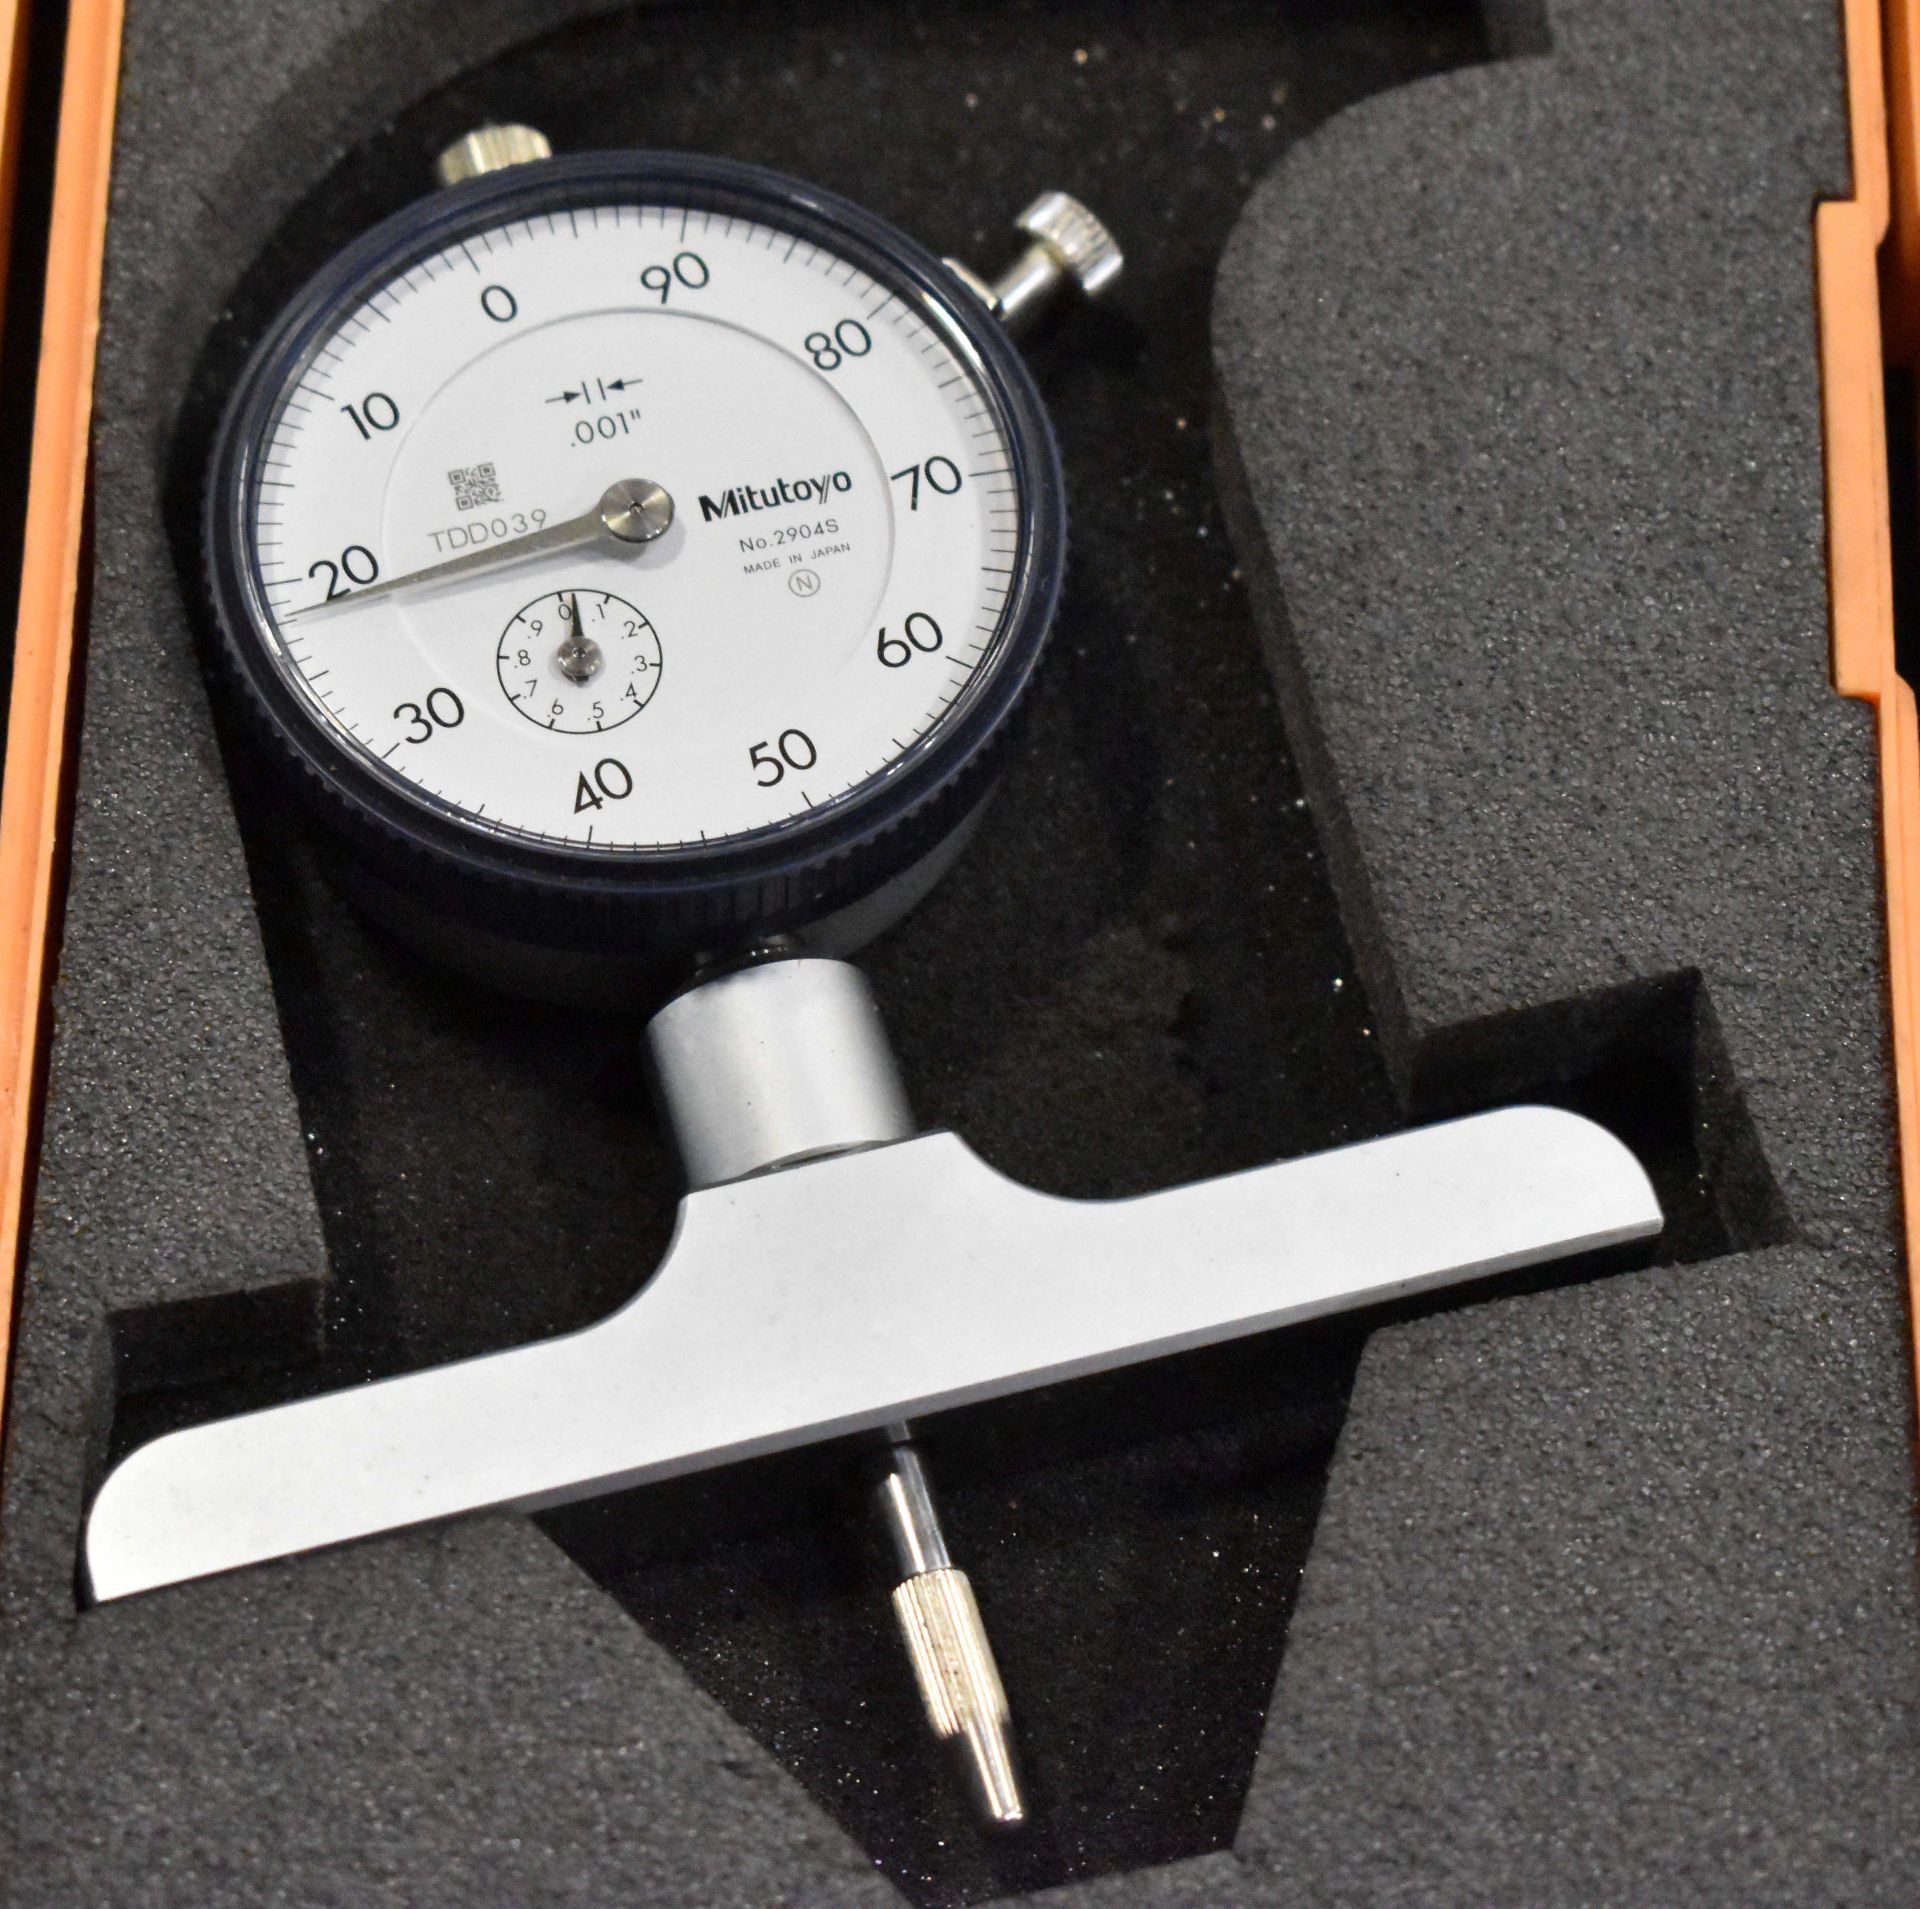 LOT/ (4) MITUTOYO DIAL DEPTH GAUGES [RIGGING FEES FOR LOT #165 - $10 USD PLUS APPLICABLE TAXES] - Image 2 of 2